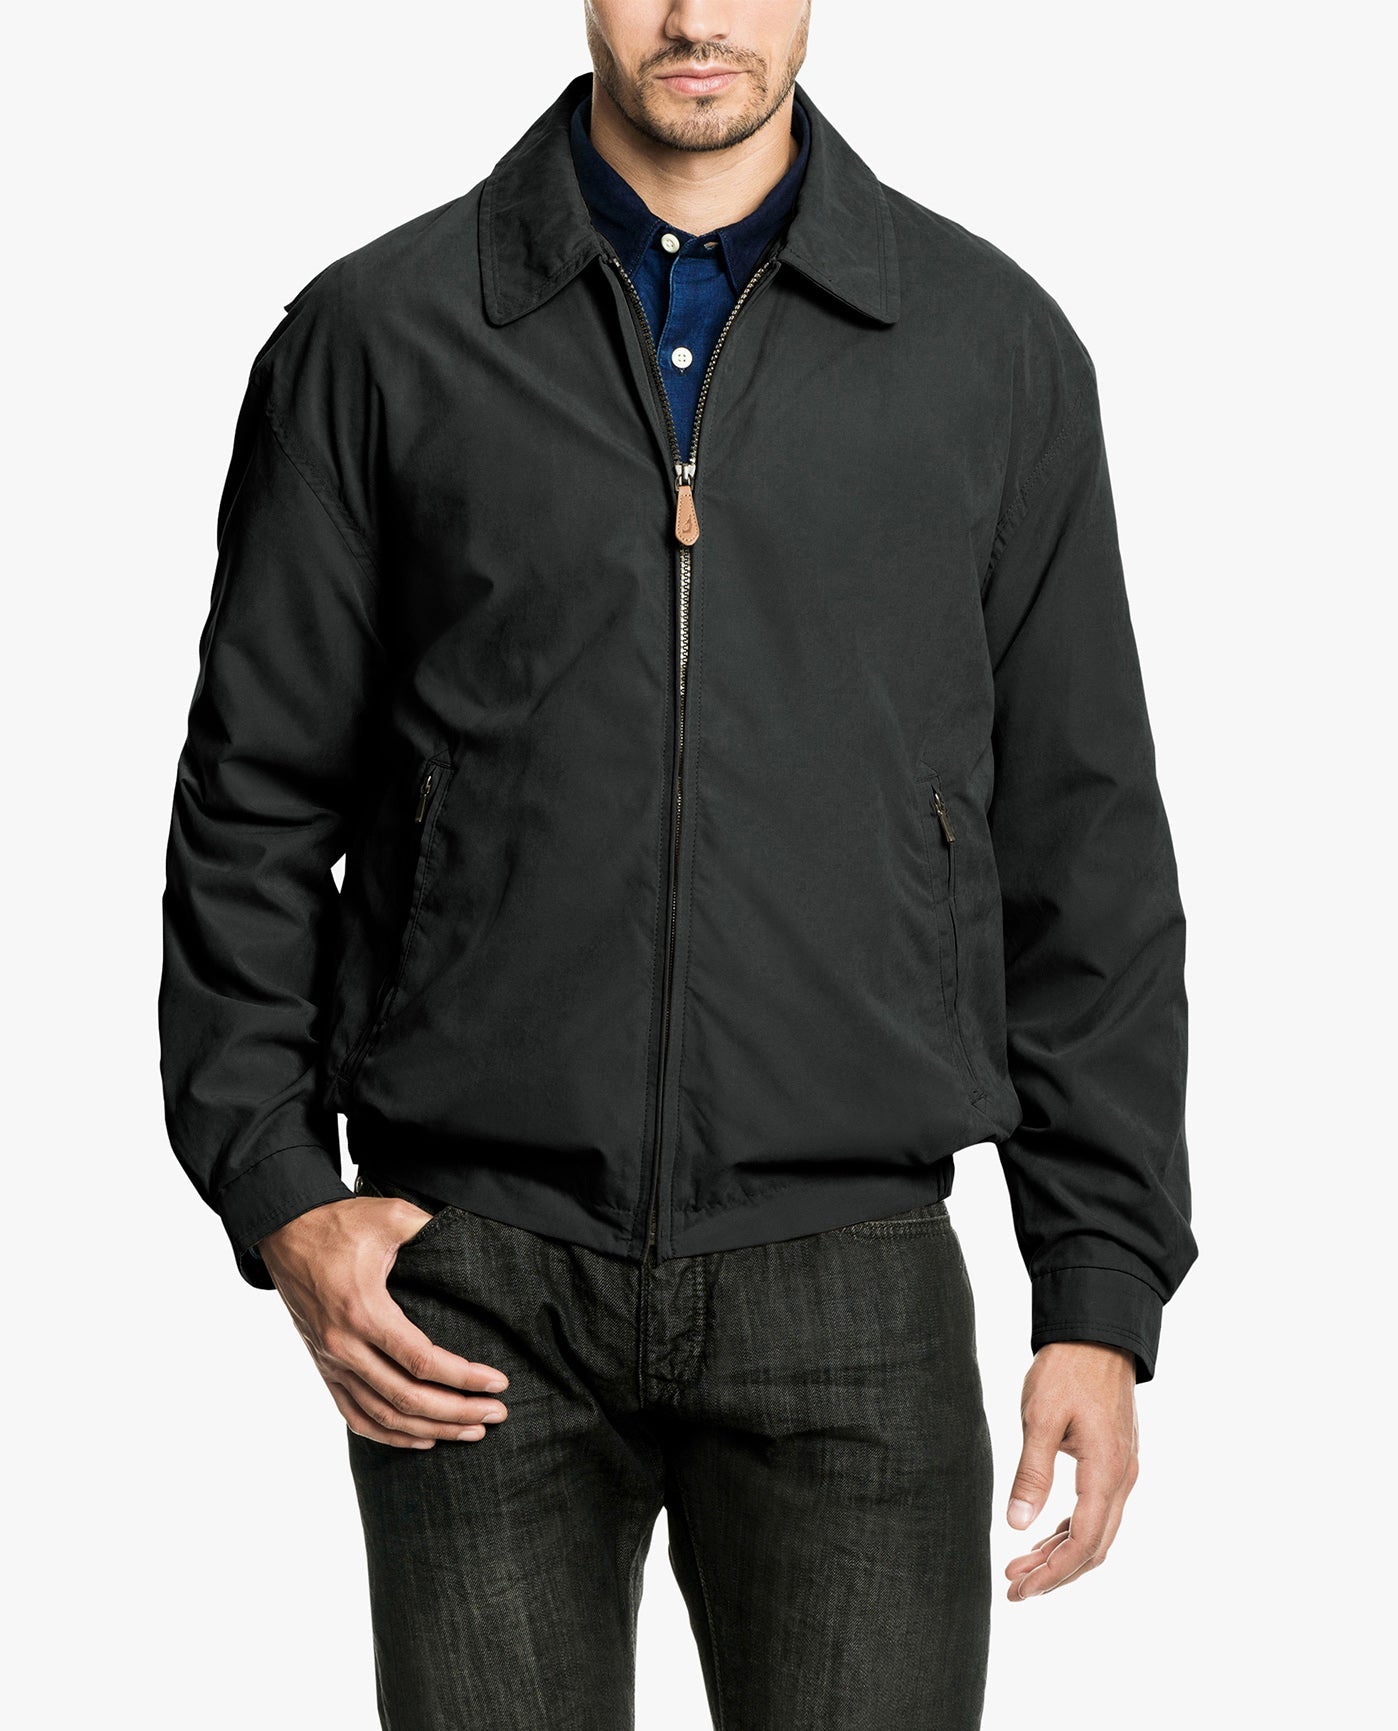 FRONT OF LIGHT WEIGHT ZIP FRONT GOLF JACKET | IRON